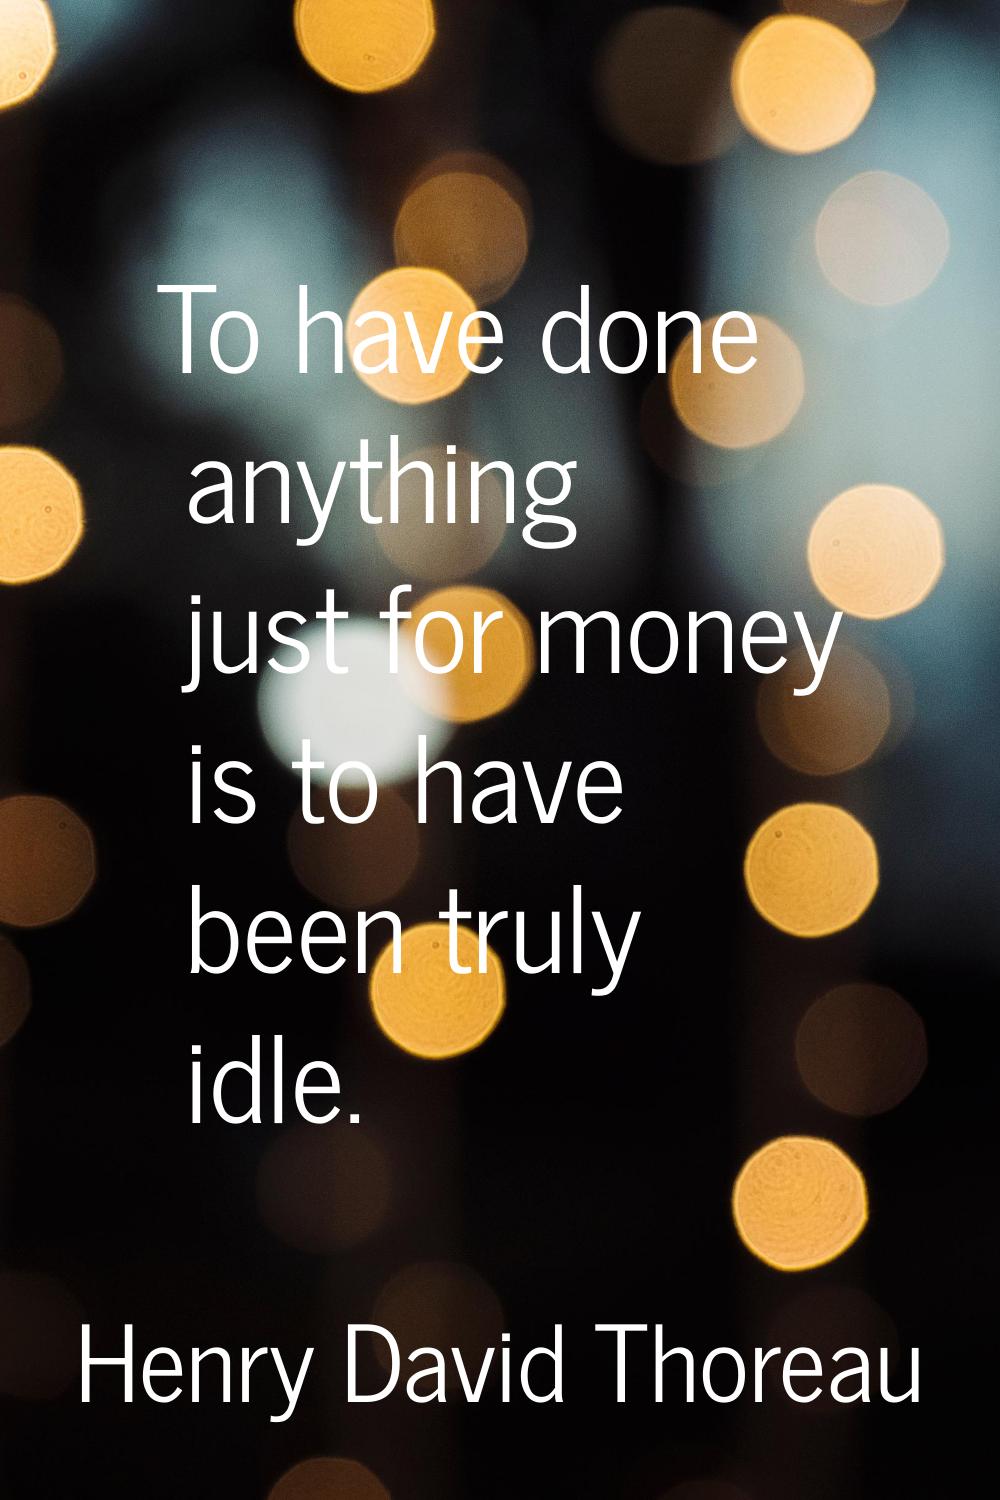 To have done anything just for money is to have been truly idle.